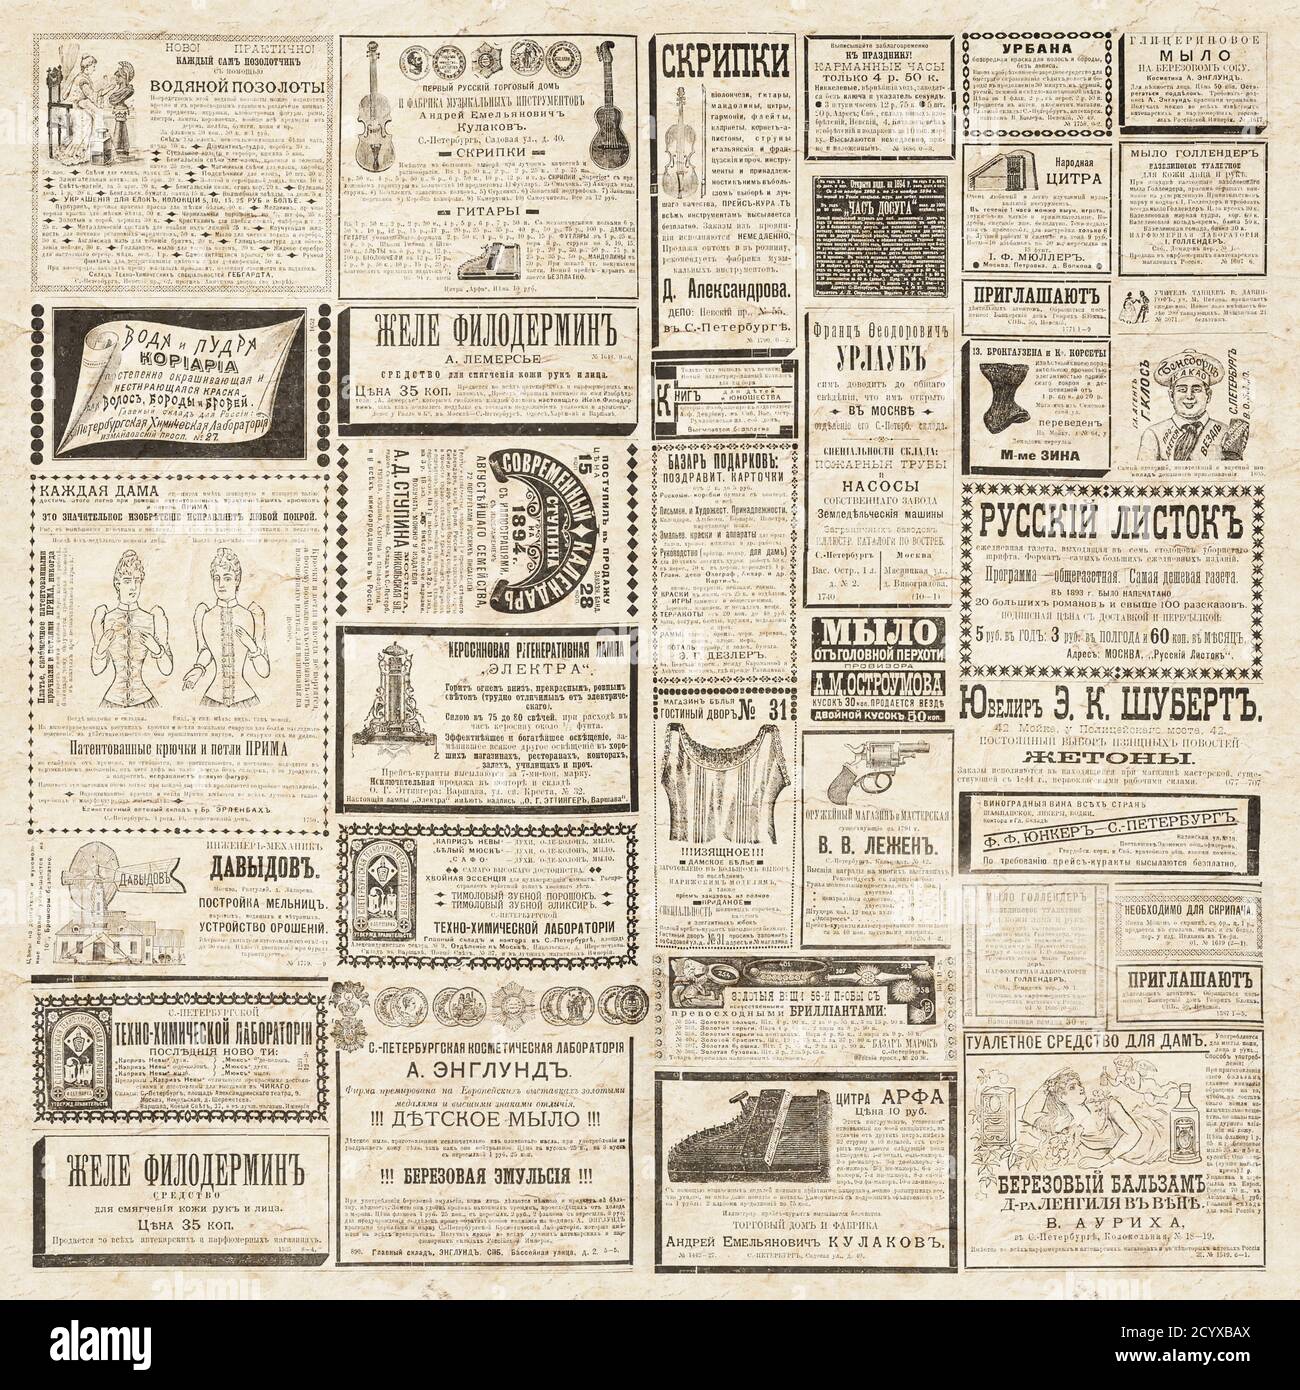 Vintage Newspaper Texture A Newspaper Page Illustration With Advertisements From A Vintage Old Russian Newspaper Of 13 Beige Collage Newspaper Bac Stock Photo Alamy